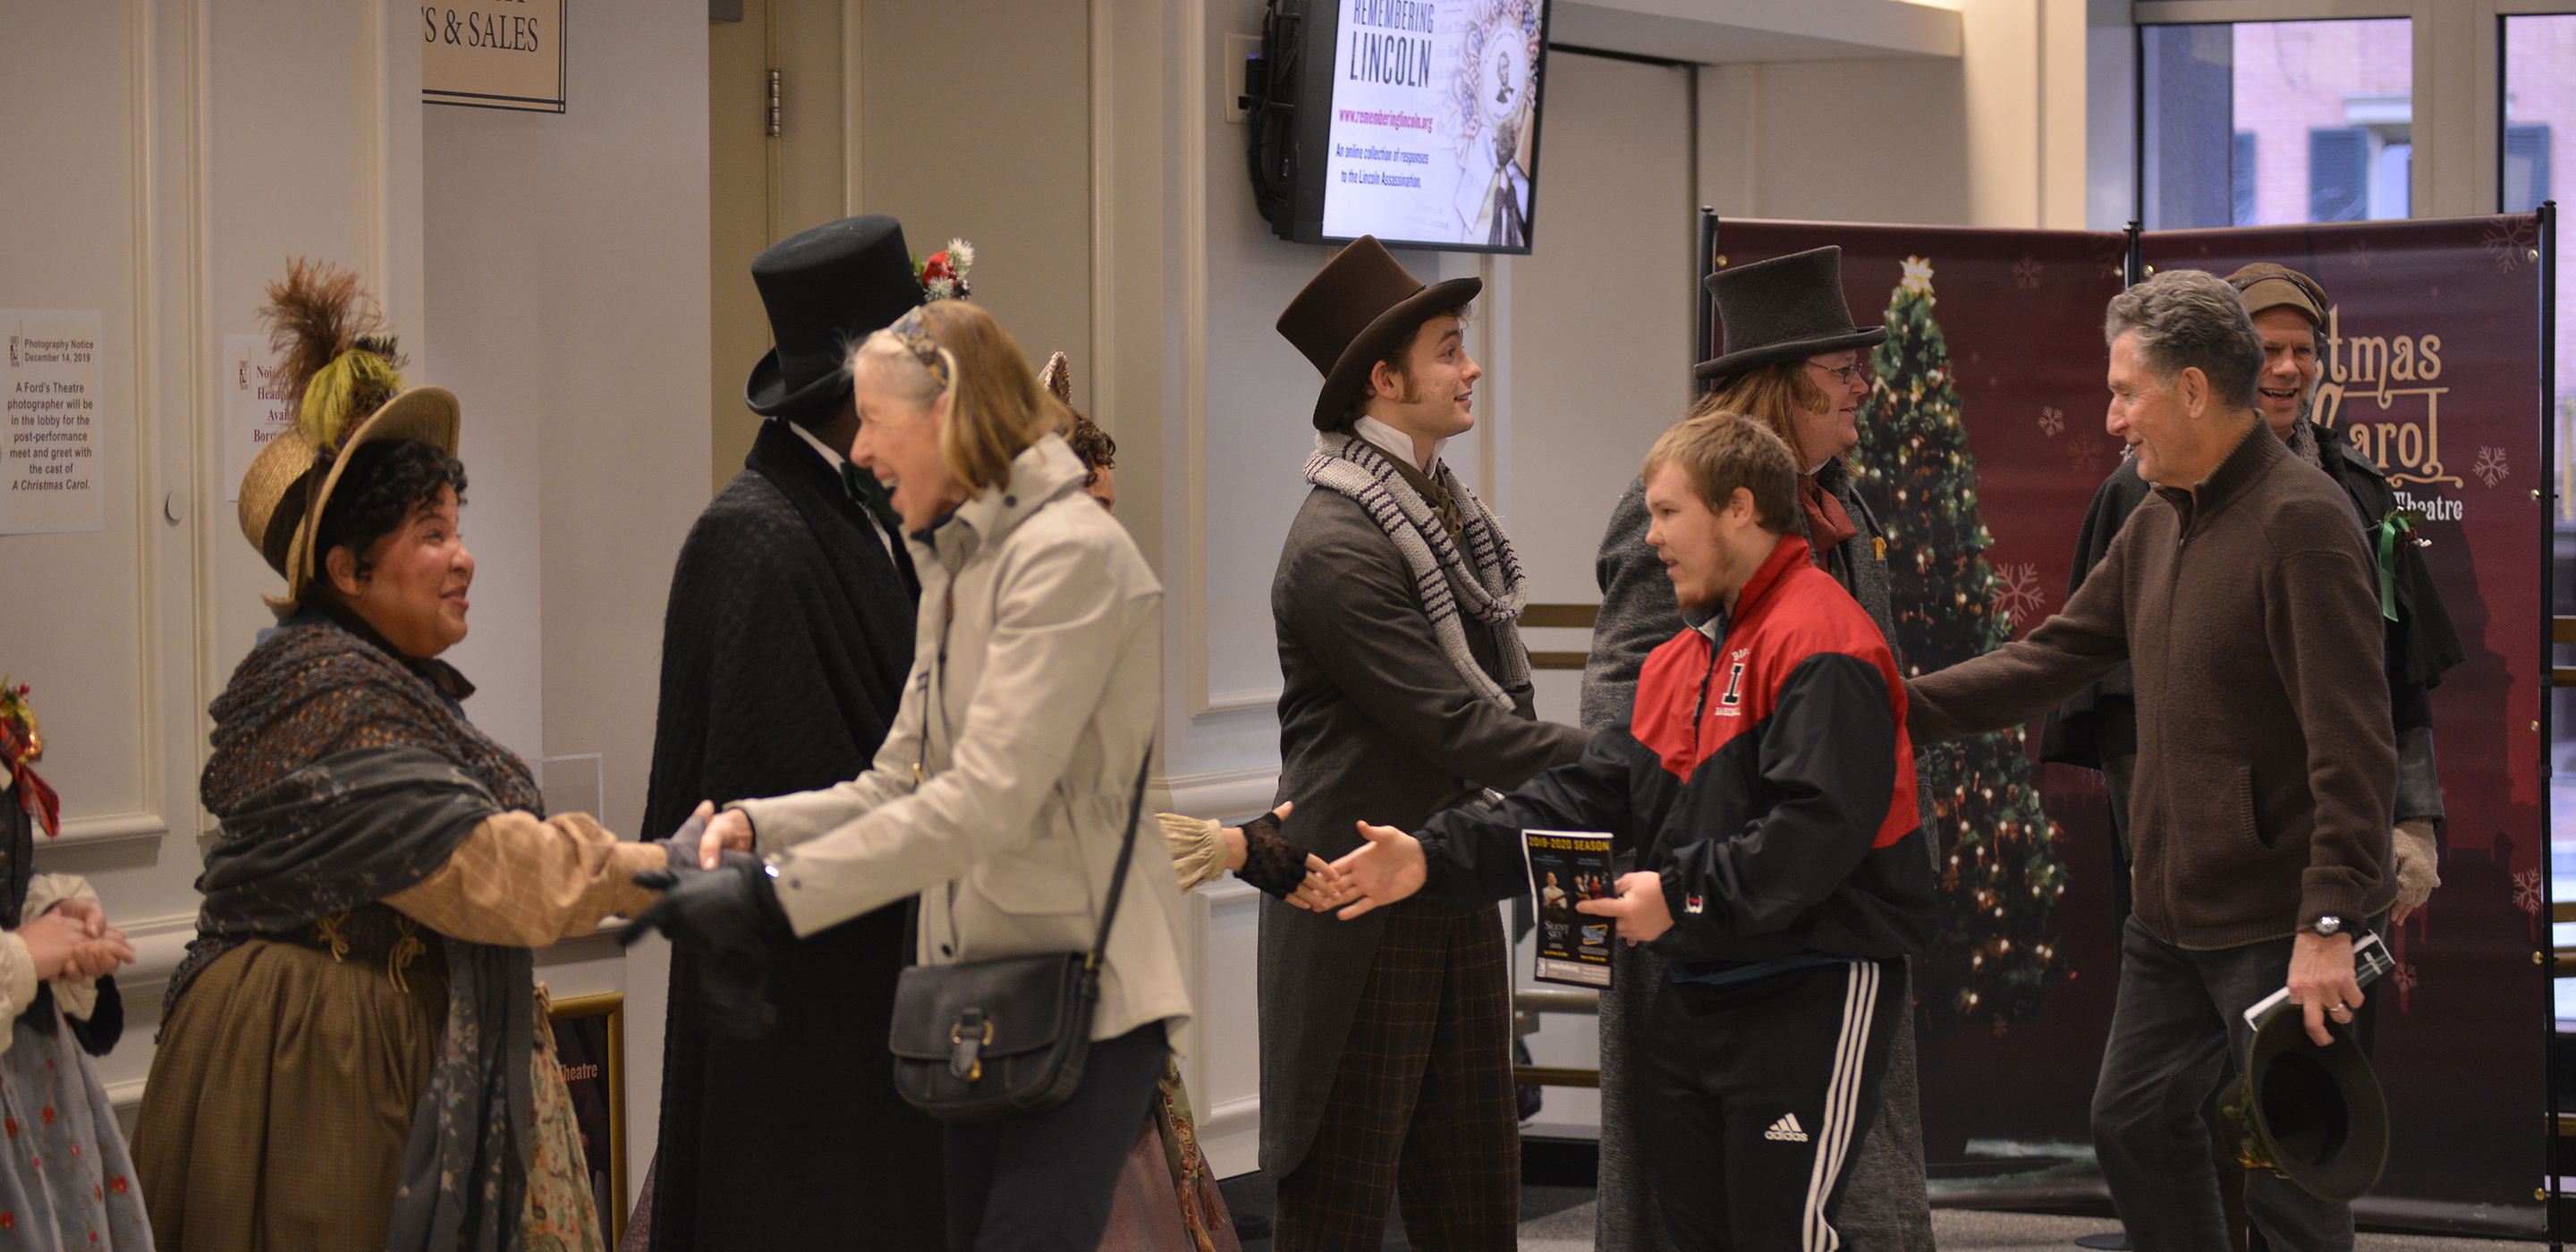 Three patrons shake hands with costumed actors as they walk through a receiving line.